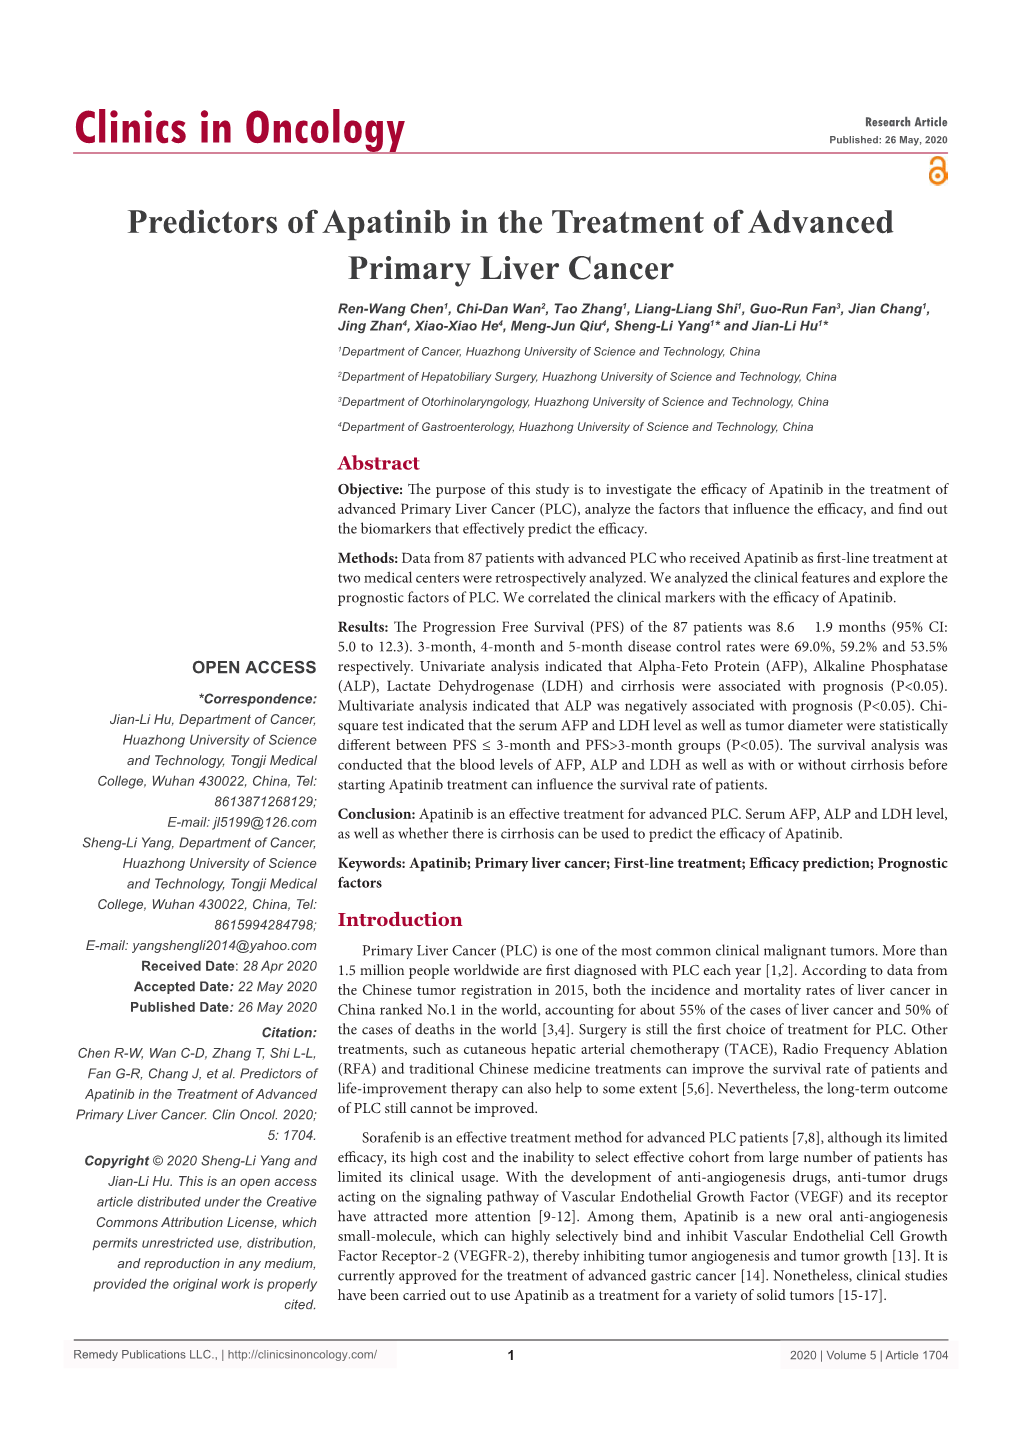 Predictors of Apatinib in the Treatment of Advanced Primary Liver Cancer